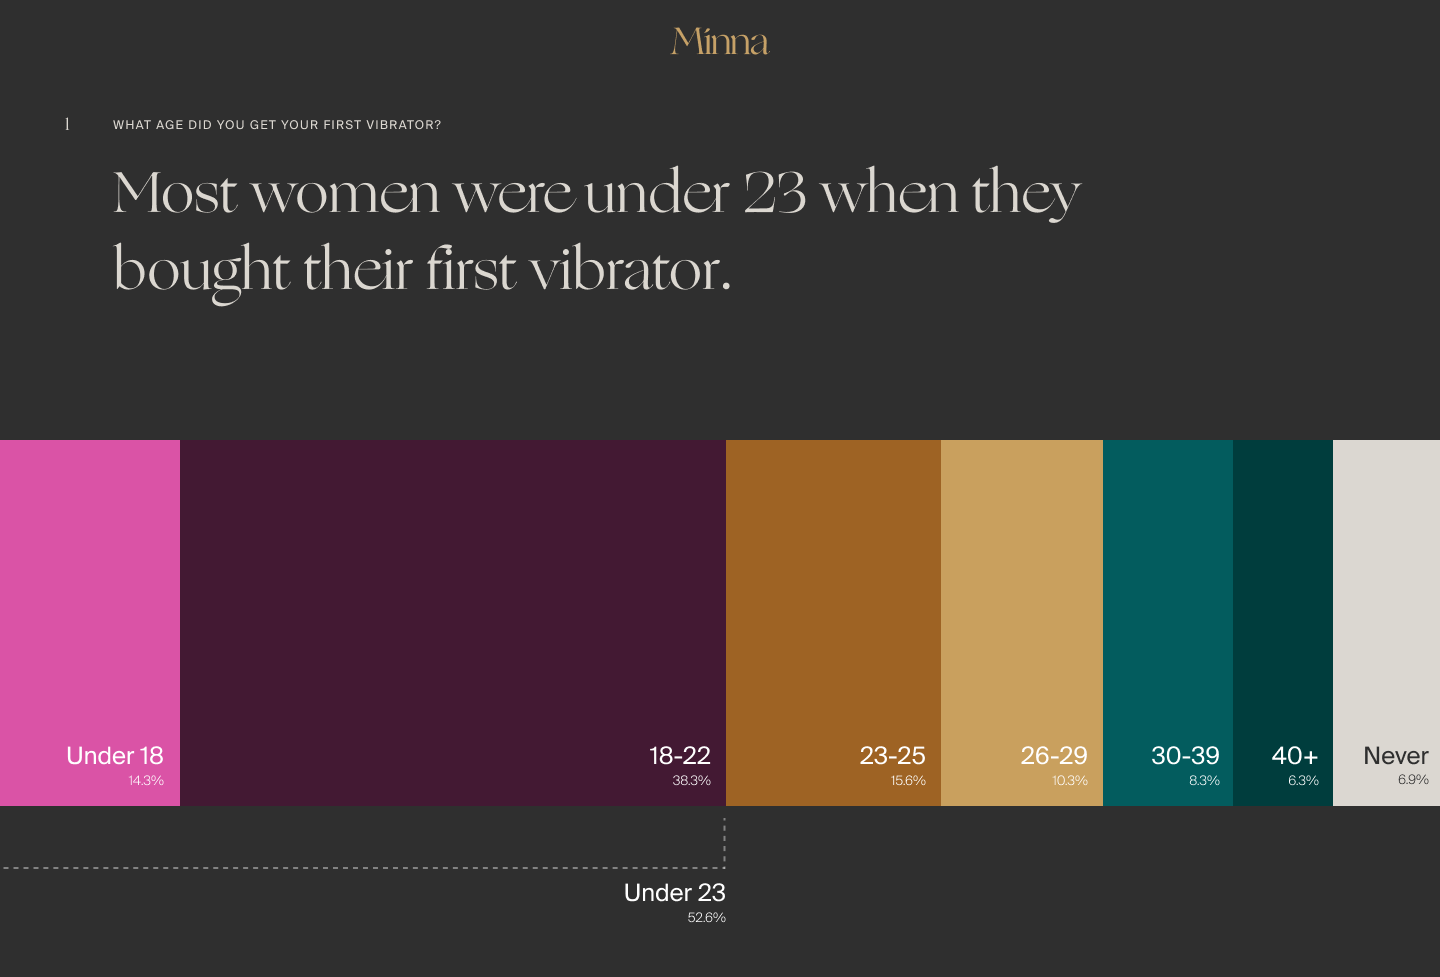 Most women were under 23 when they bought their first vibrator.